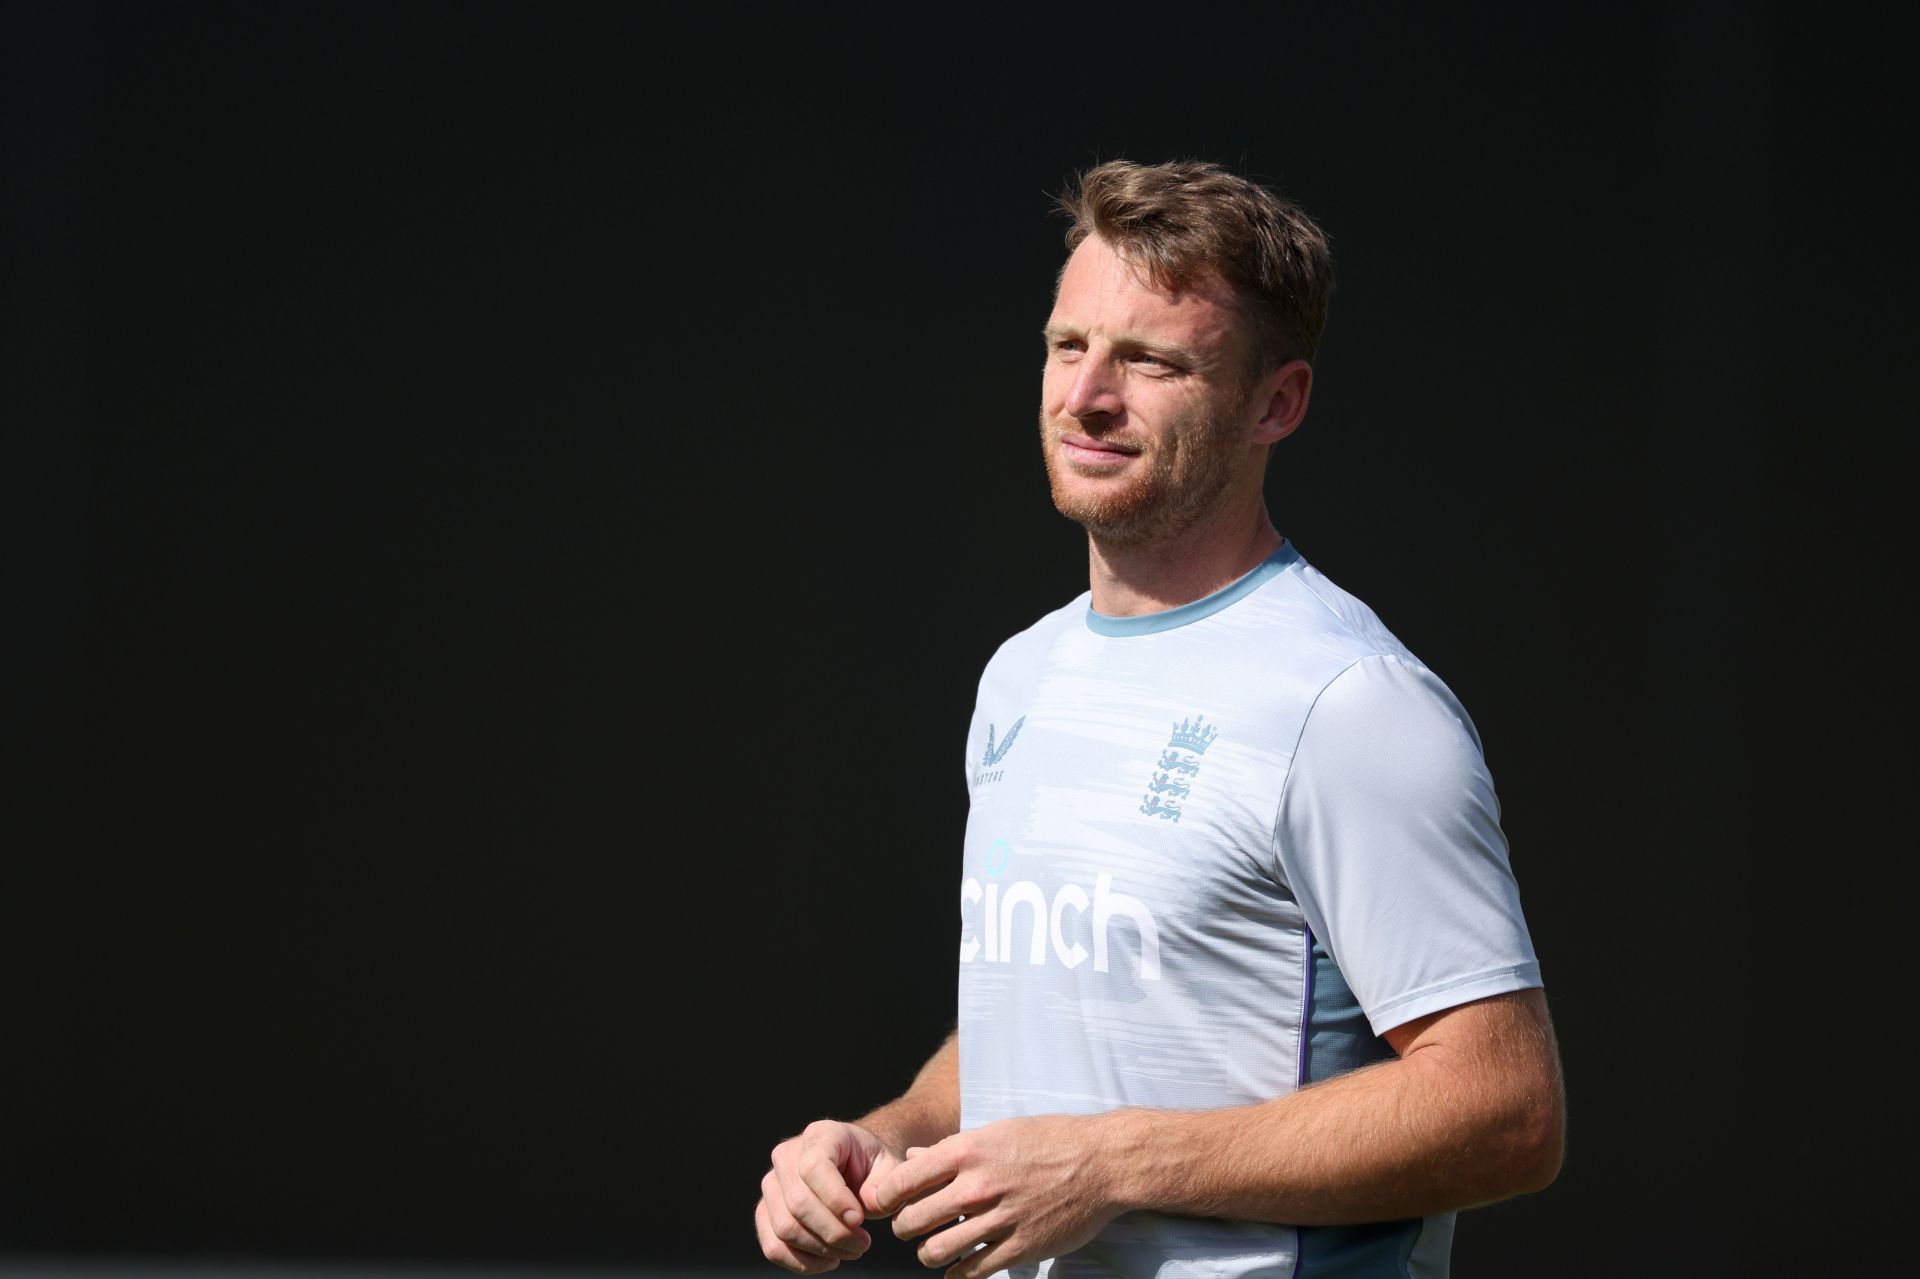 Jos Buttler will lead England in the shortest format of the game (Image Courtesy: Getty Images)